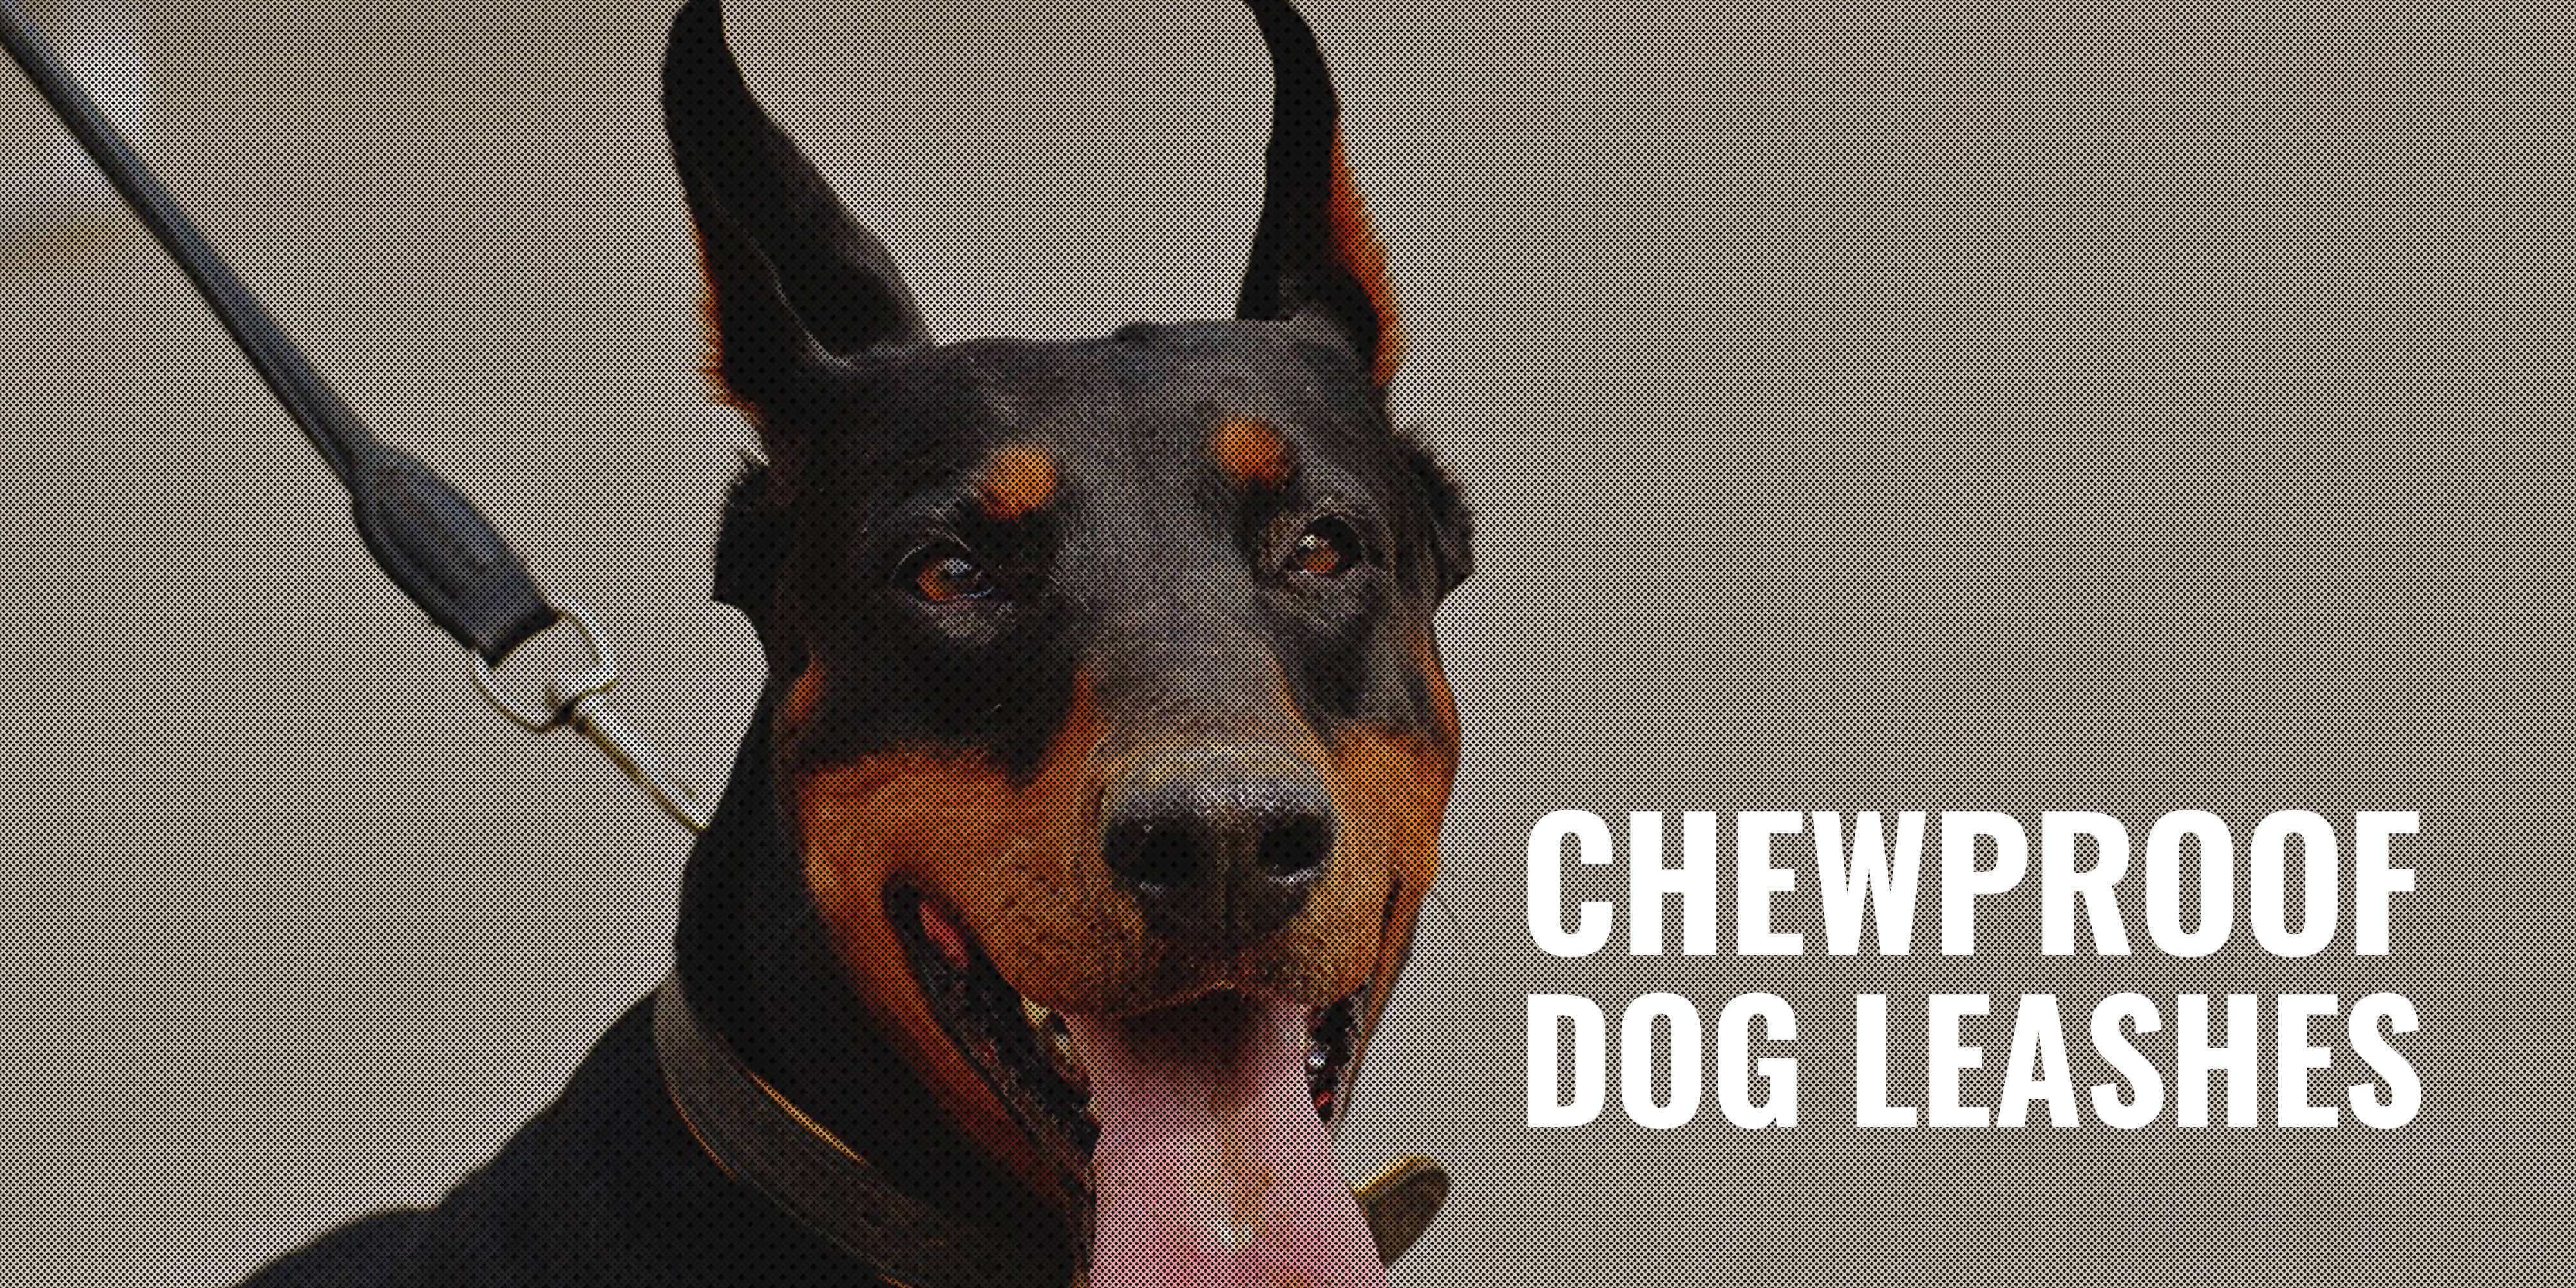 chewproof dog leashes